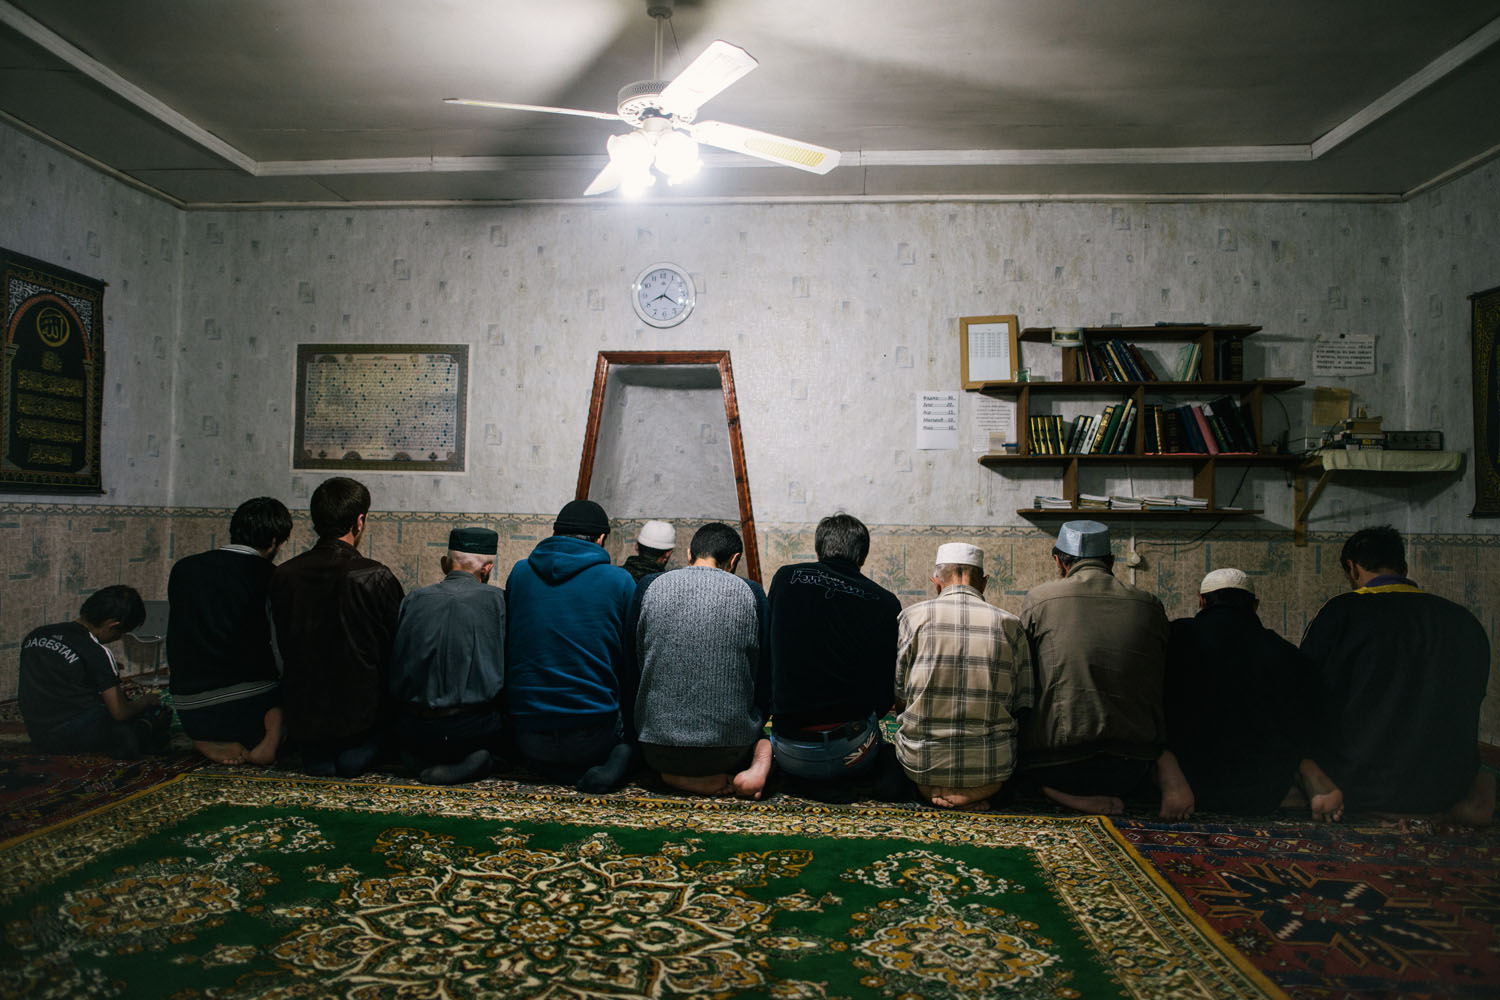 People pray in the mosque visited by William Plotnikov in village Utamysh, where  he lived and died